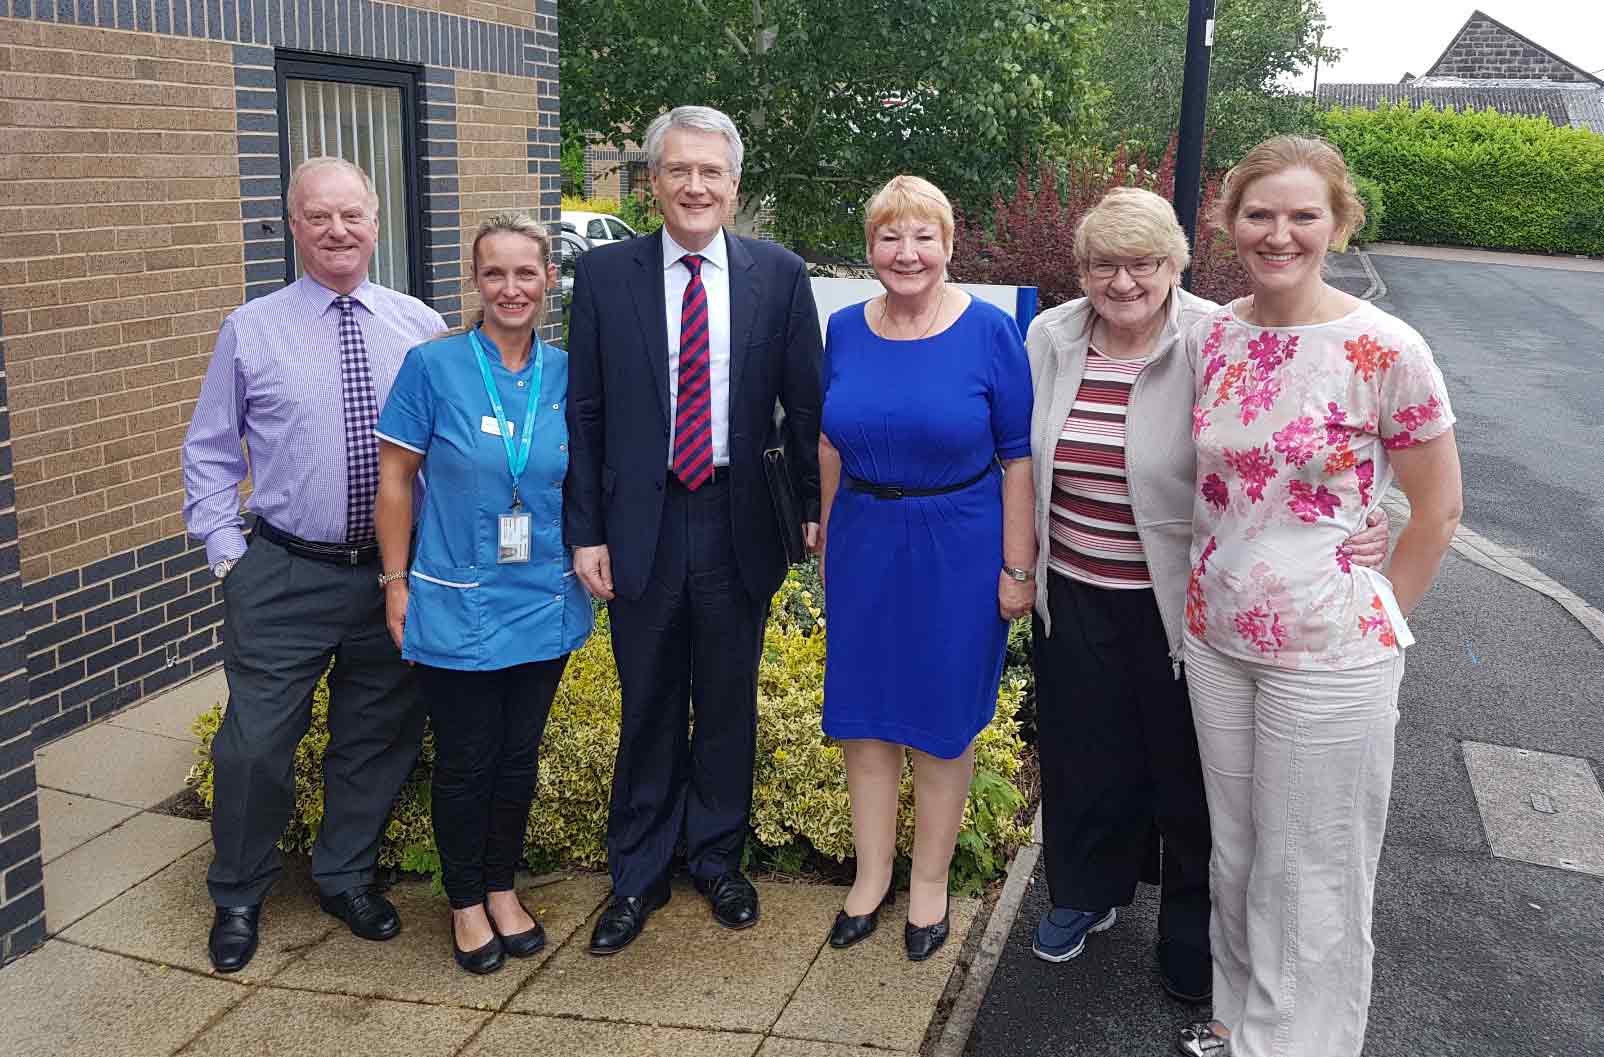 Andrew Jones MP meets members of the team at Continued Care, including directors Samantha Harrison and Christine Mitchell, and associate director Helen Walker